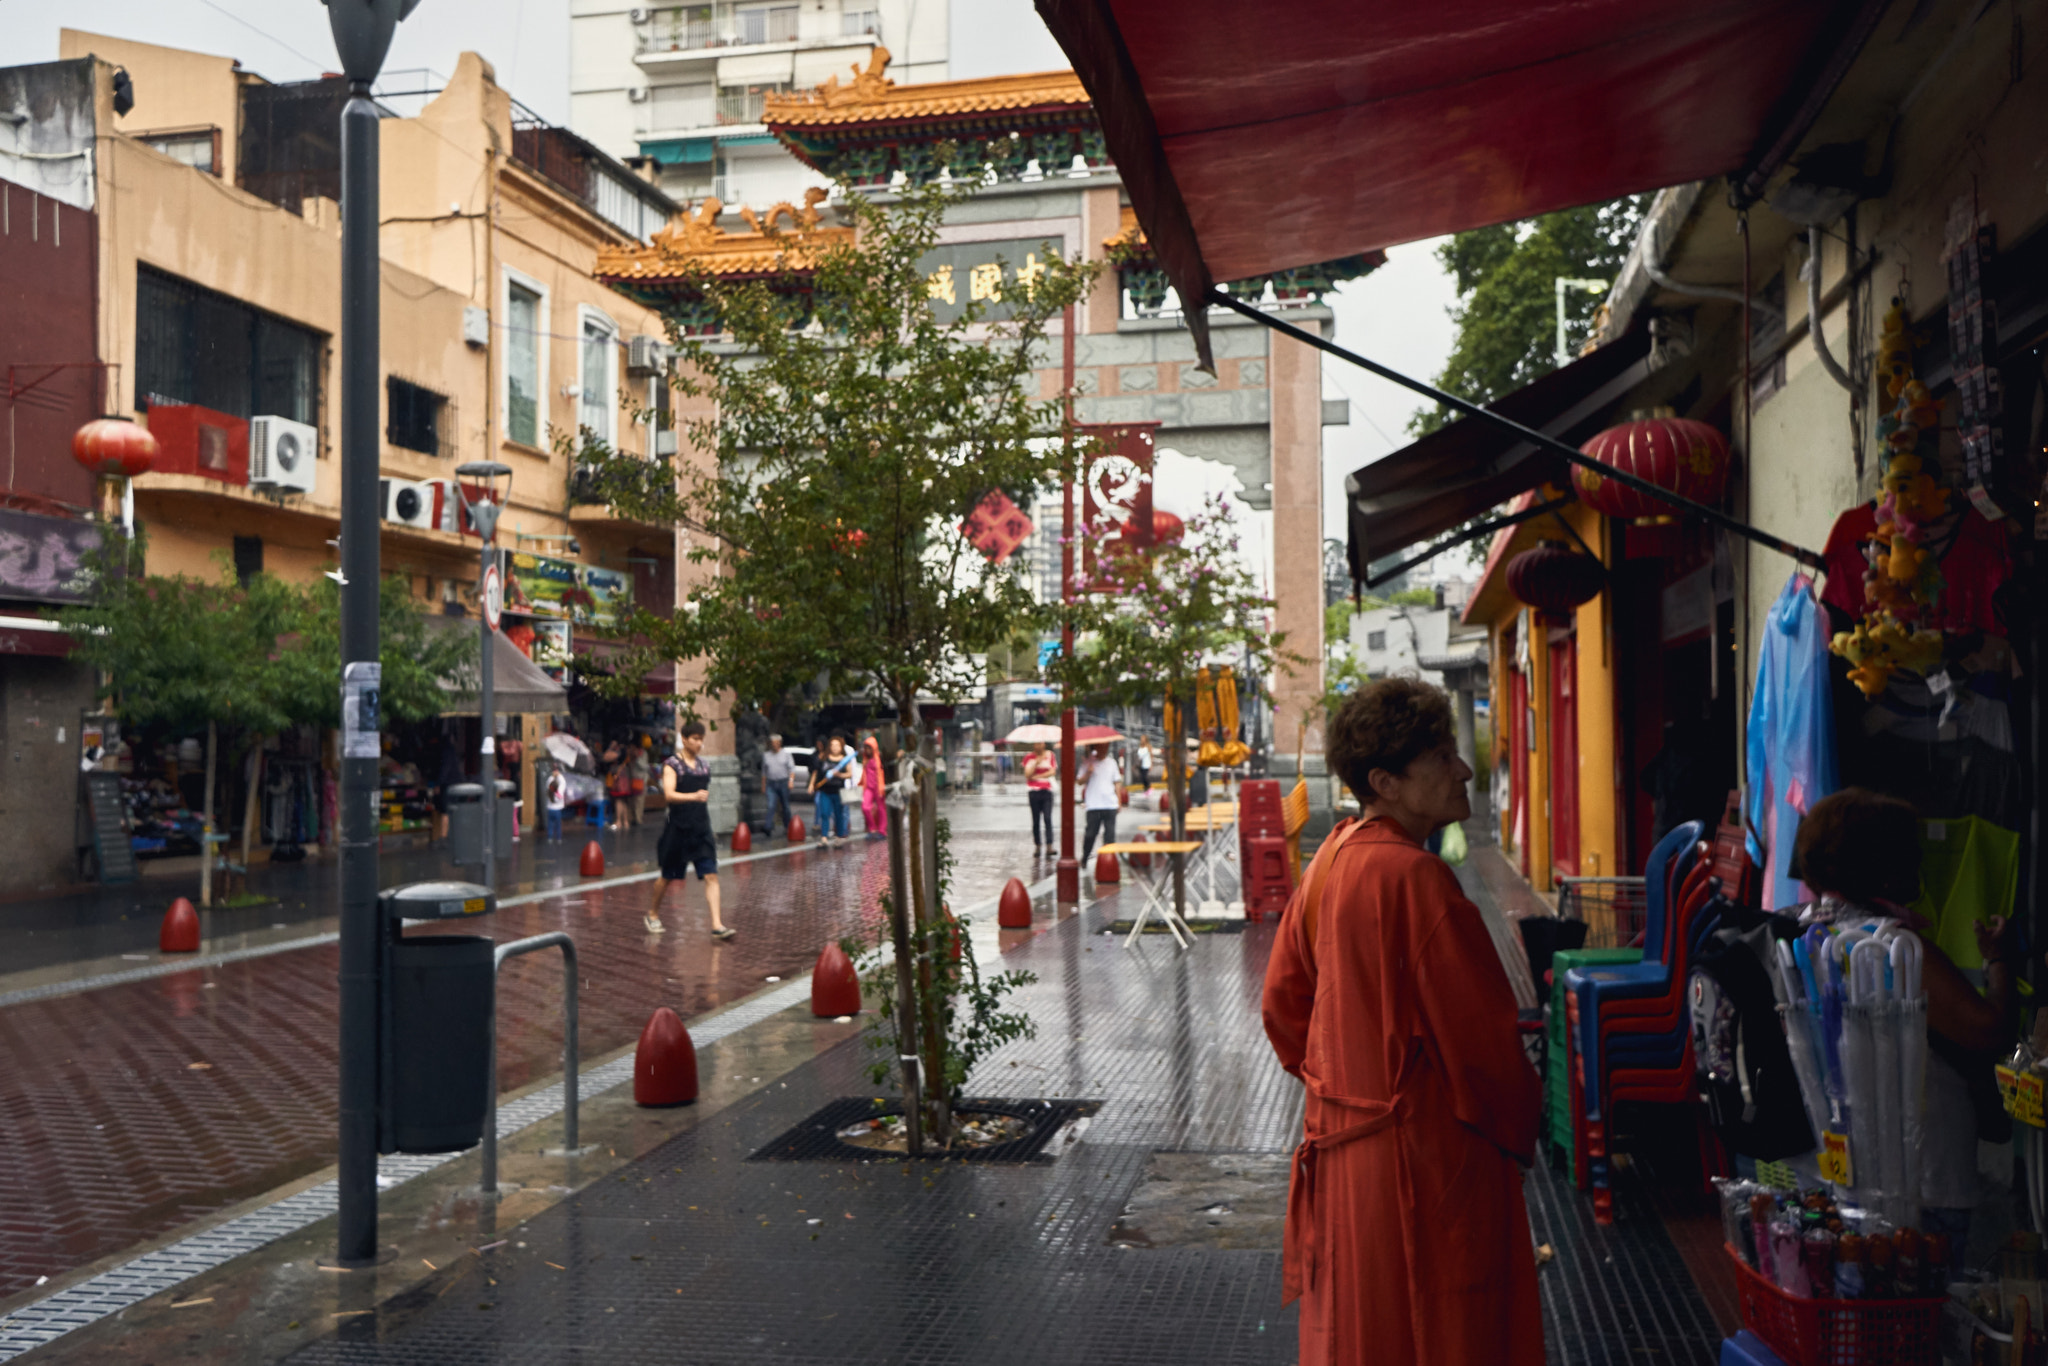 Sony a6000 sample photo. Woman in orange in rainy chinatown photography